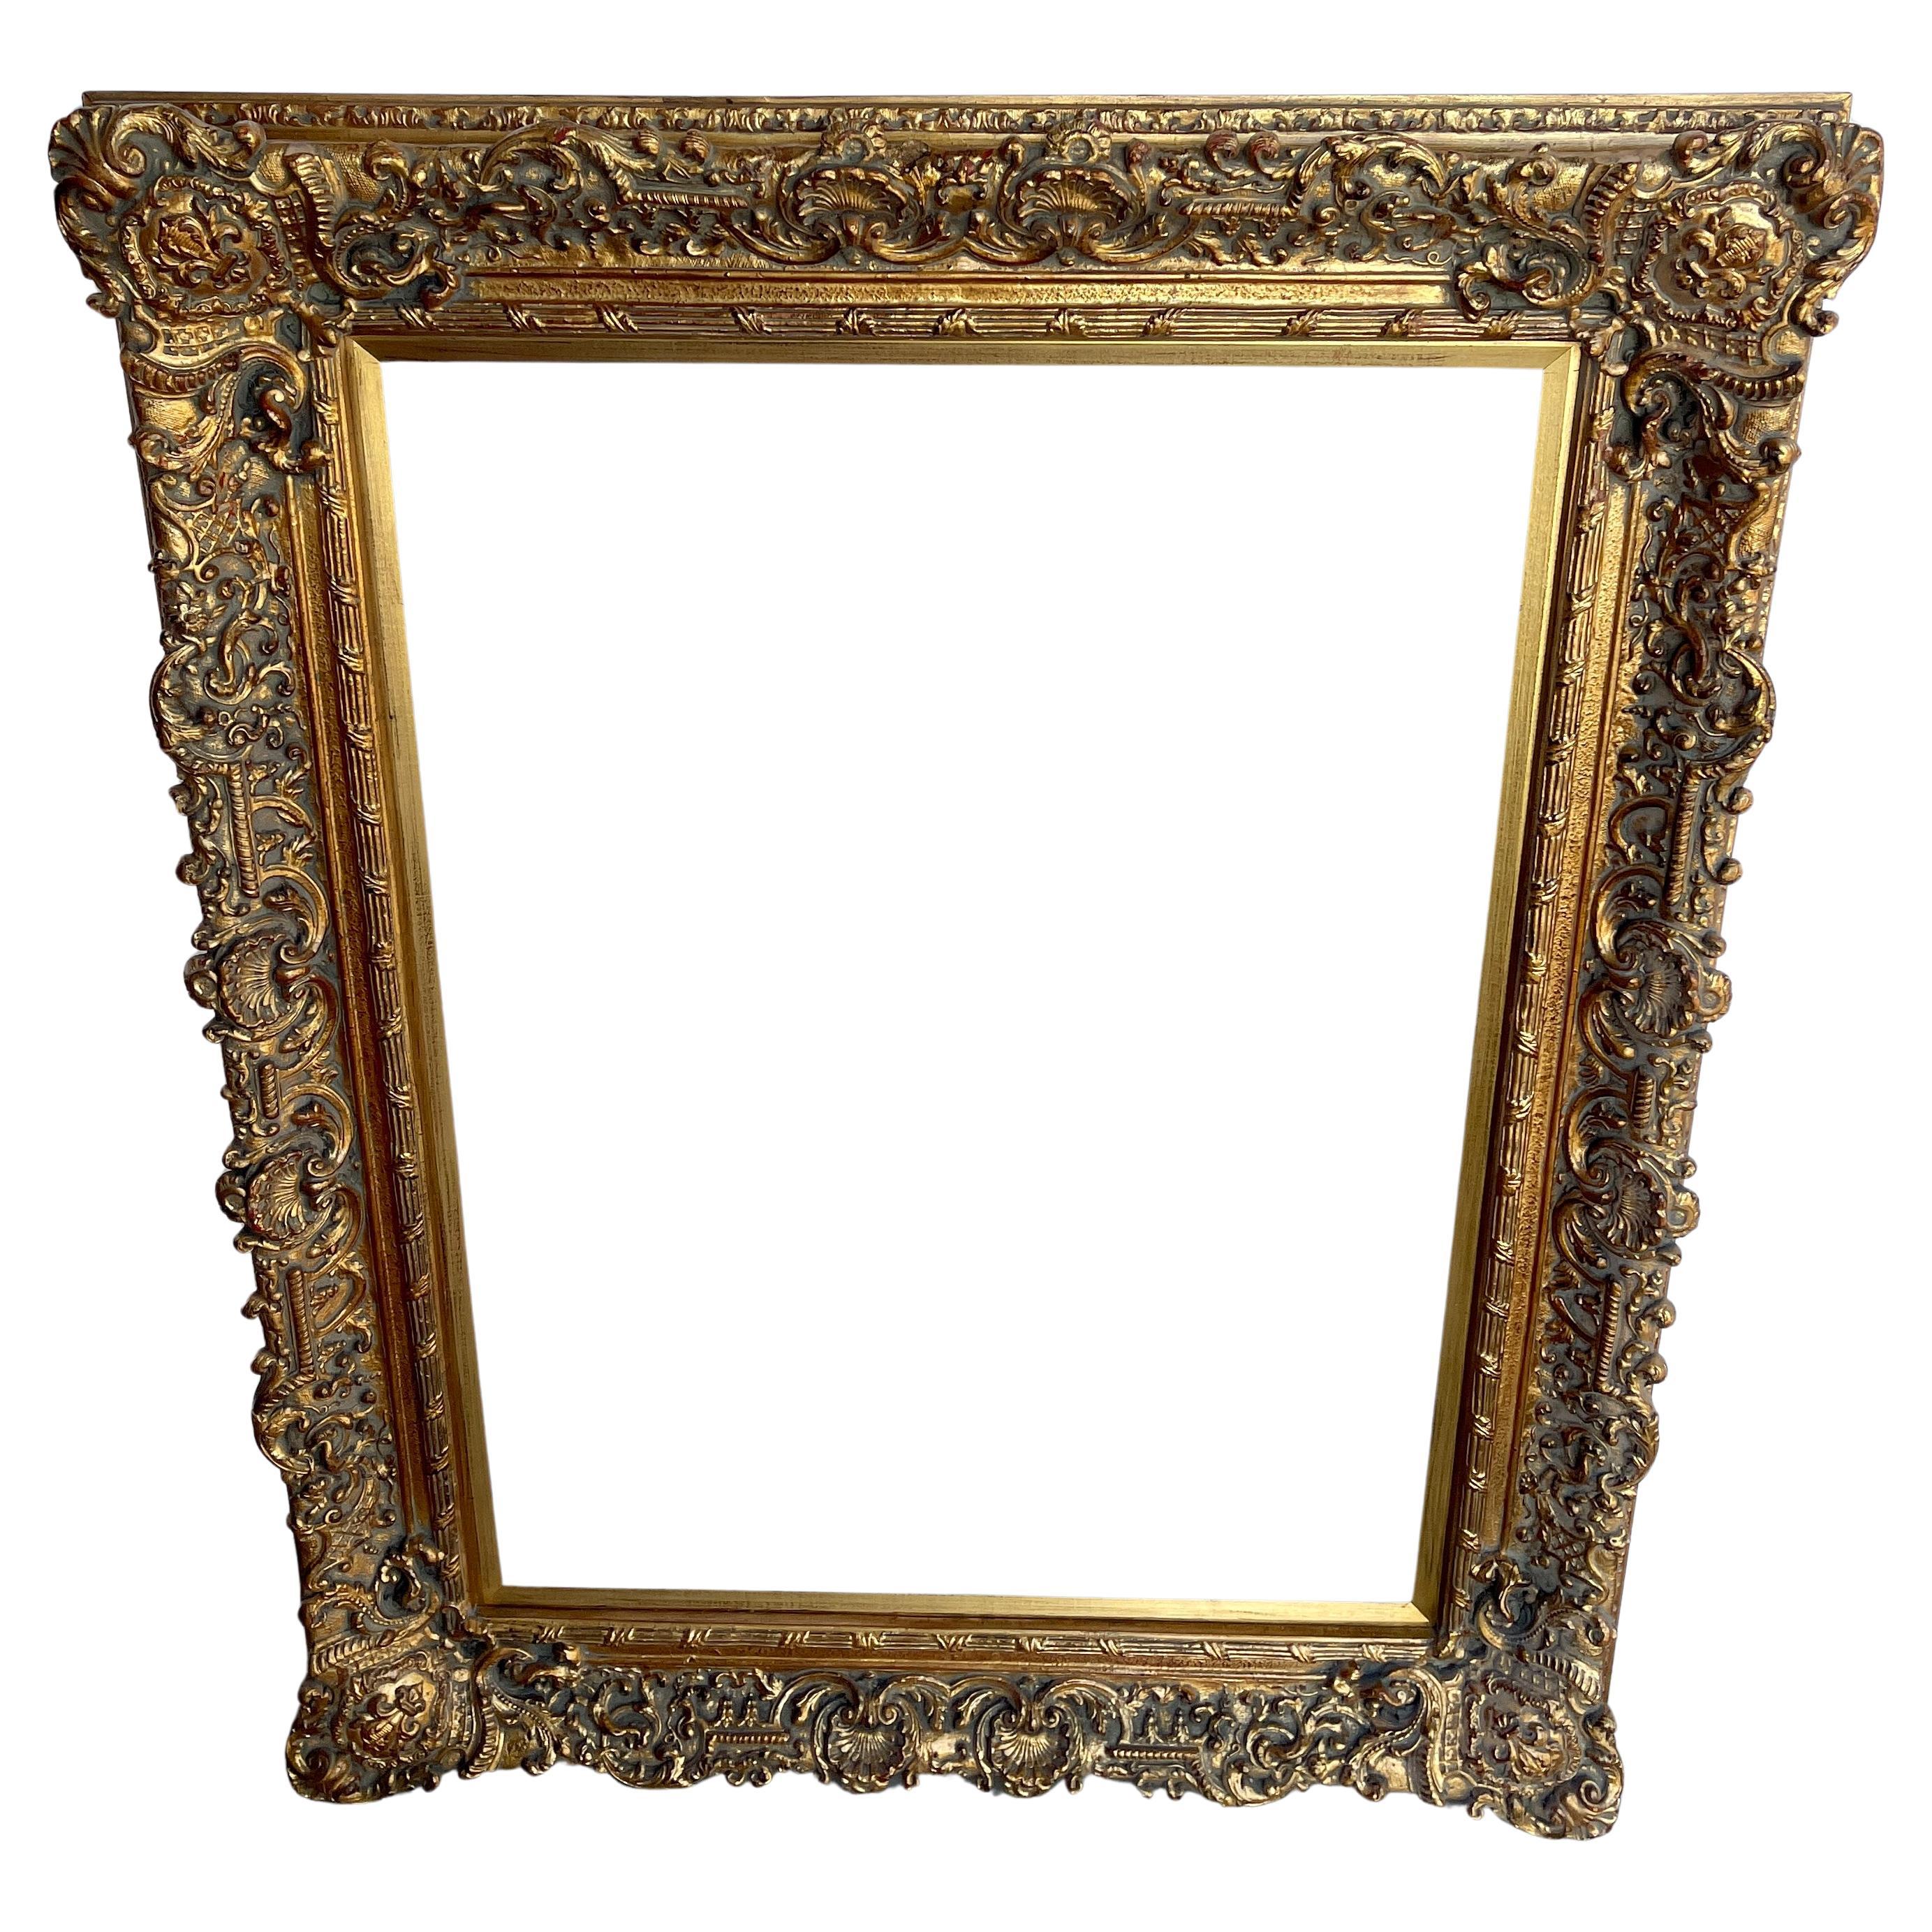 20th Century Large Ornate Carved Gilt Wood Frame, French Rococo Style 